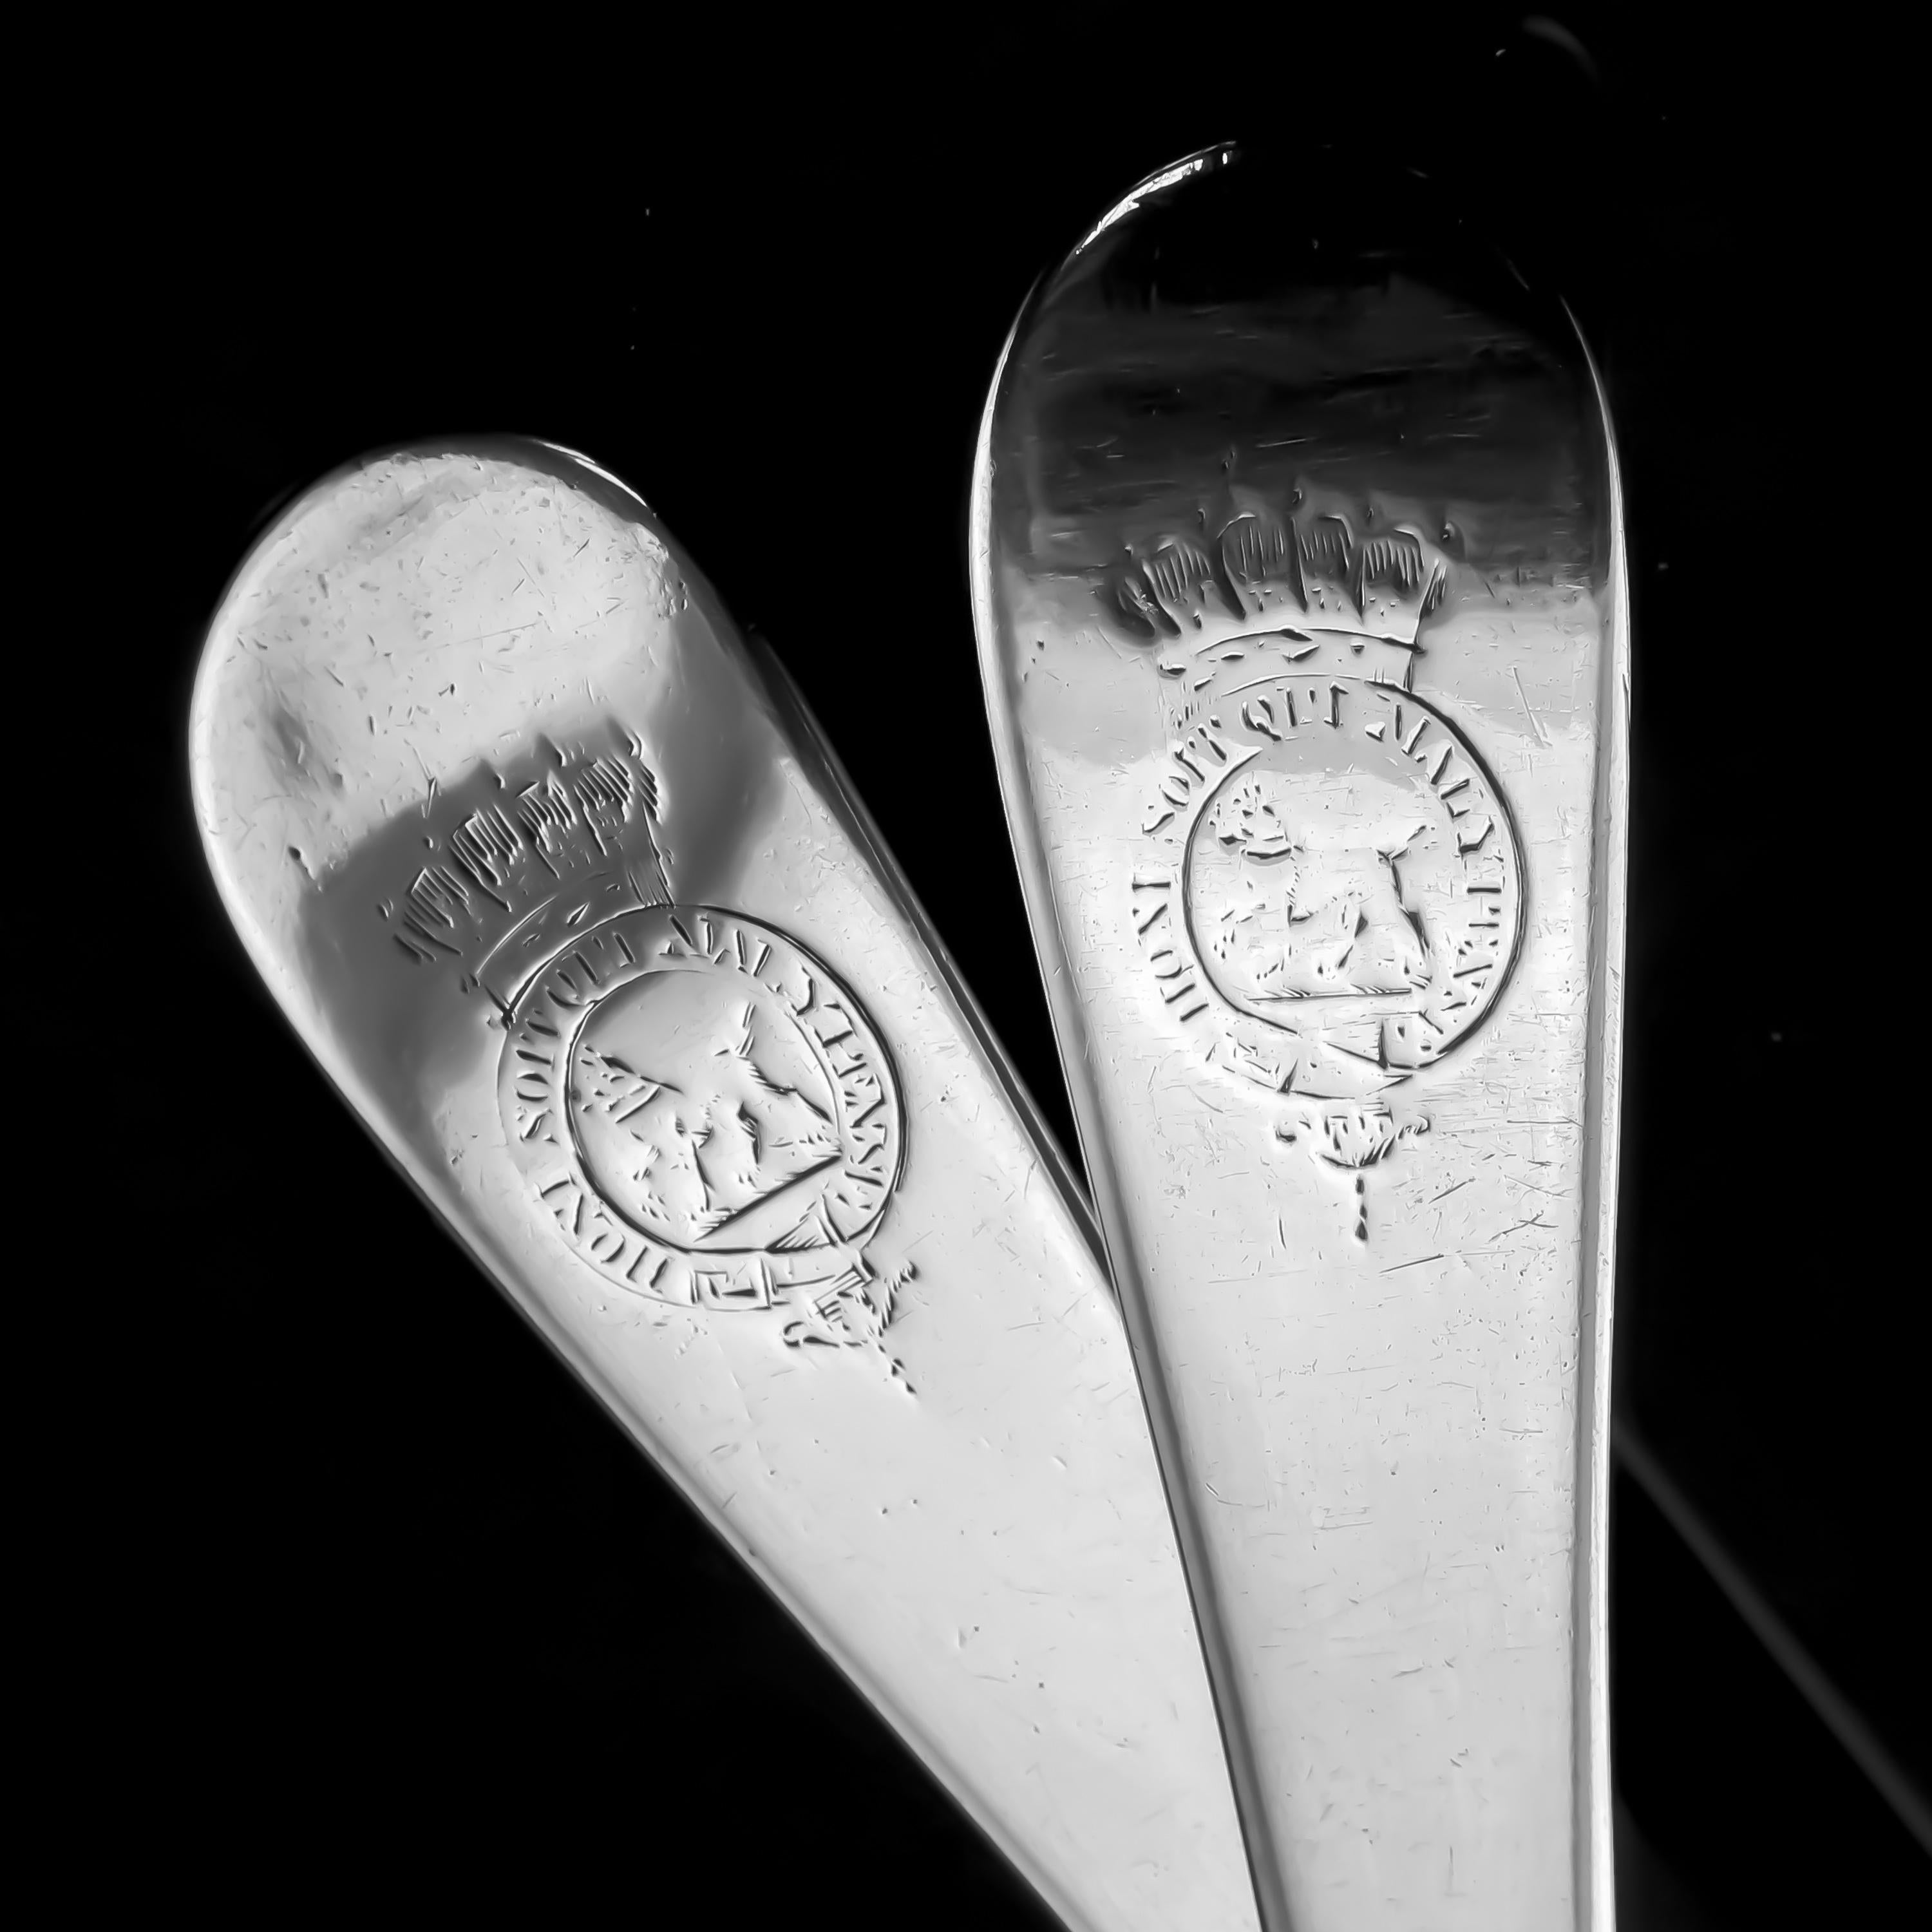 We are delighted to have acquired and be able to offer this pair of solid silver Georgian ladles, one made by Thomas Northcote & the other George Smith, London 1784/5.
 
The pair is crafted with a classic minimalist Georgian design allowing for the